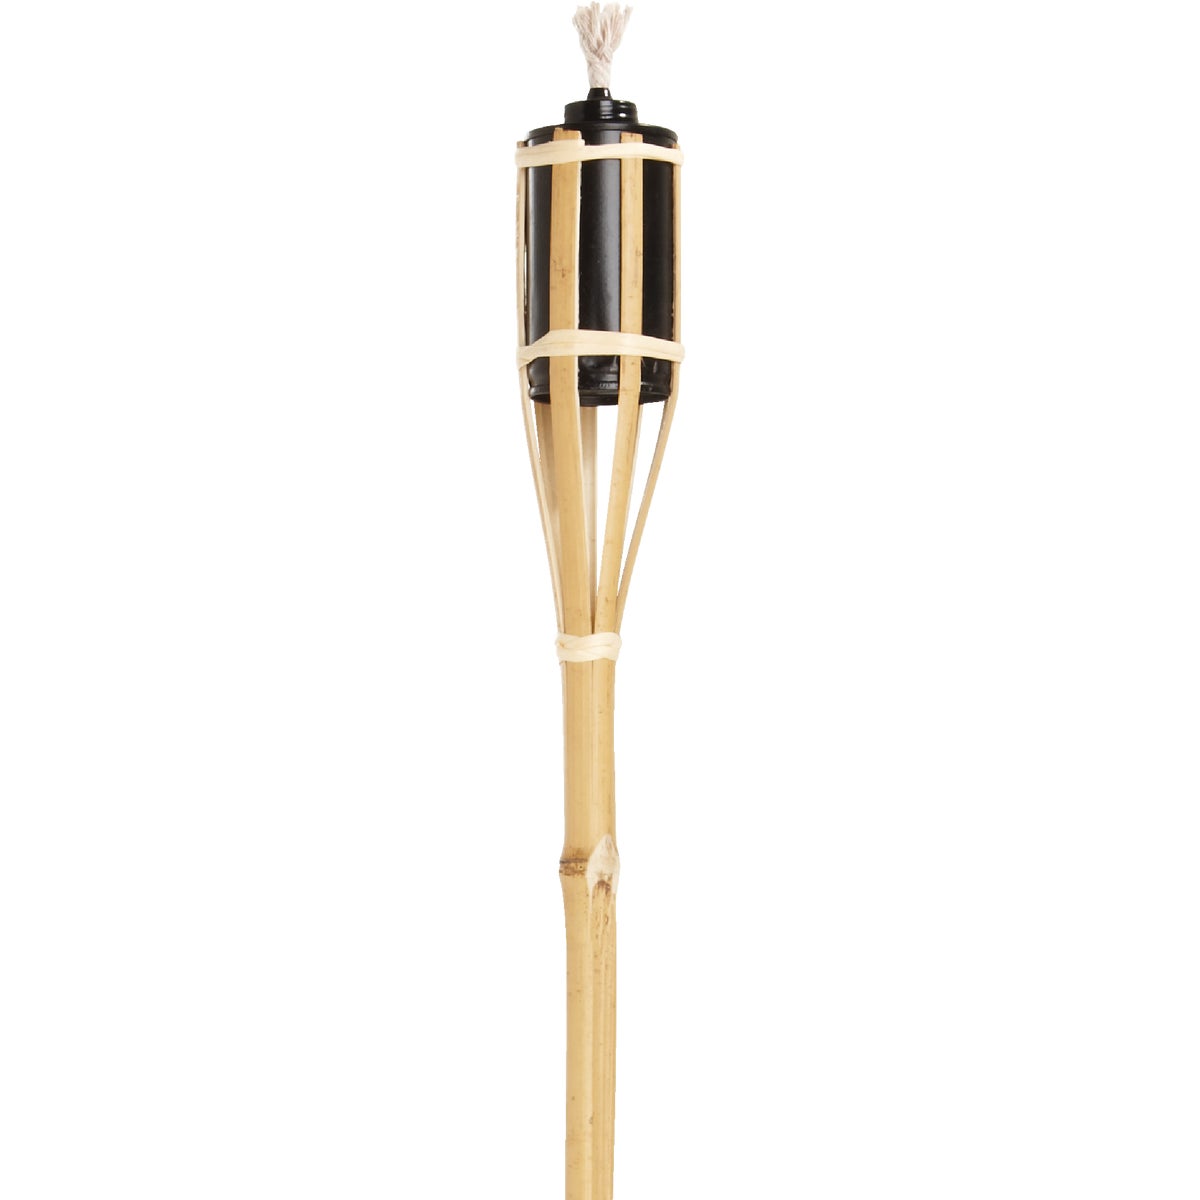 Item 701365, Bamboo patio torch ideal for lighting decks, patios, and backyards.